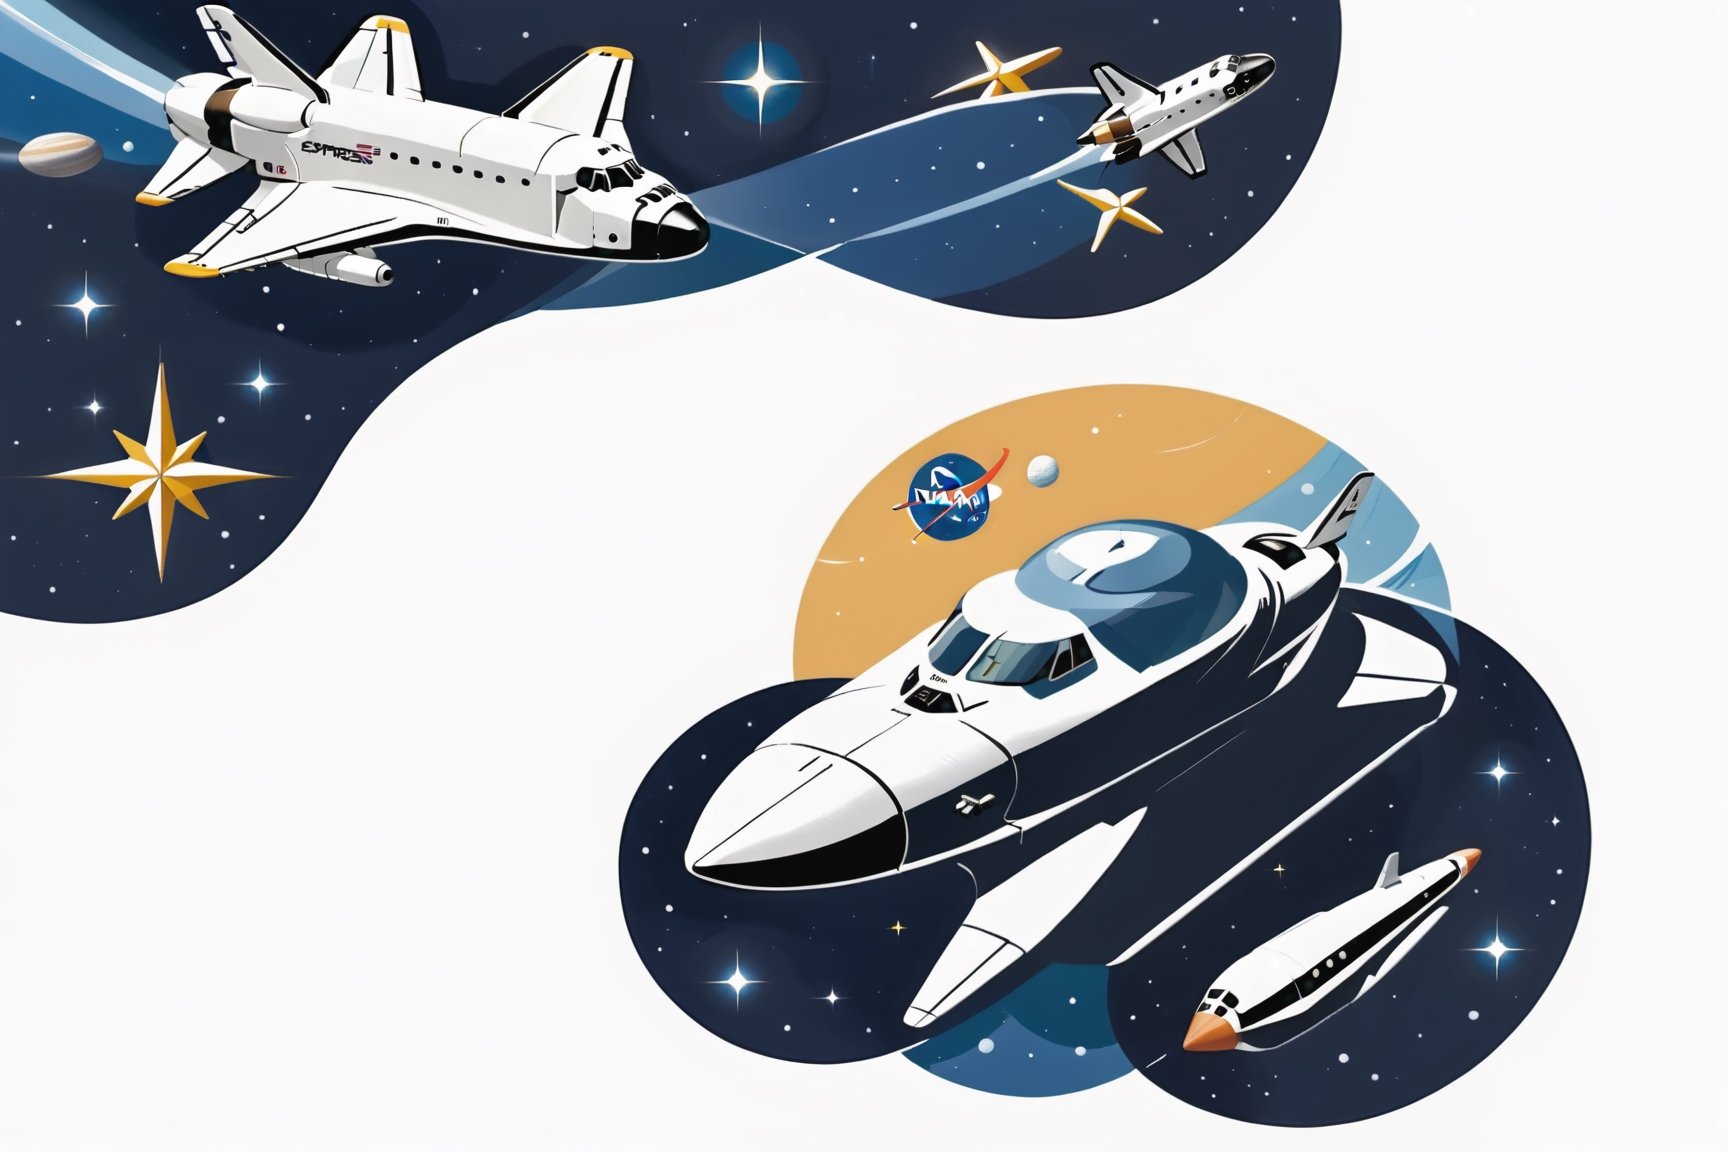 There  an image of a space shuttle with a star in the background, vintage space station logo, big train in space, retro science fiction spaceship, small retro starship in the sky, ornate spaceship painting, space graphic art in the background, far away spaceship in the background, spaceship in space, the Milky Way Express,  spaceship in background, WHITE BACKGROUND